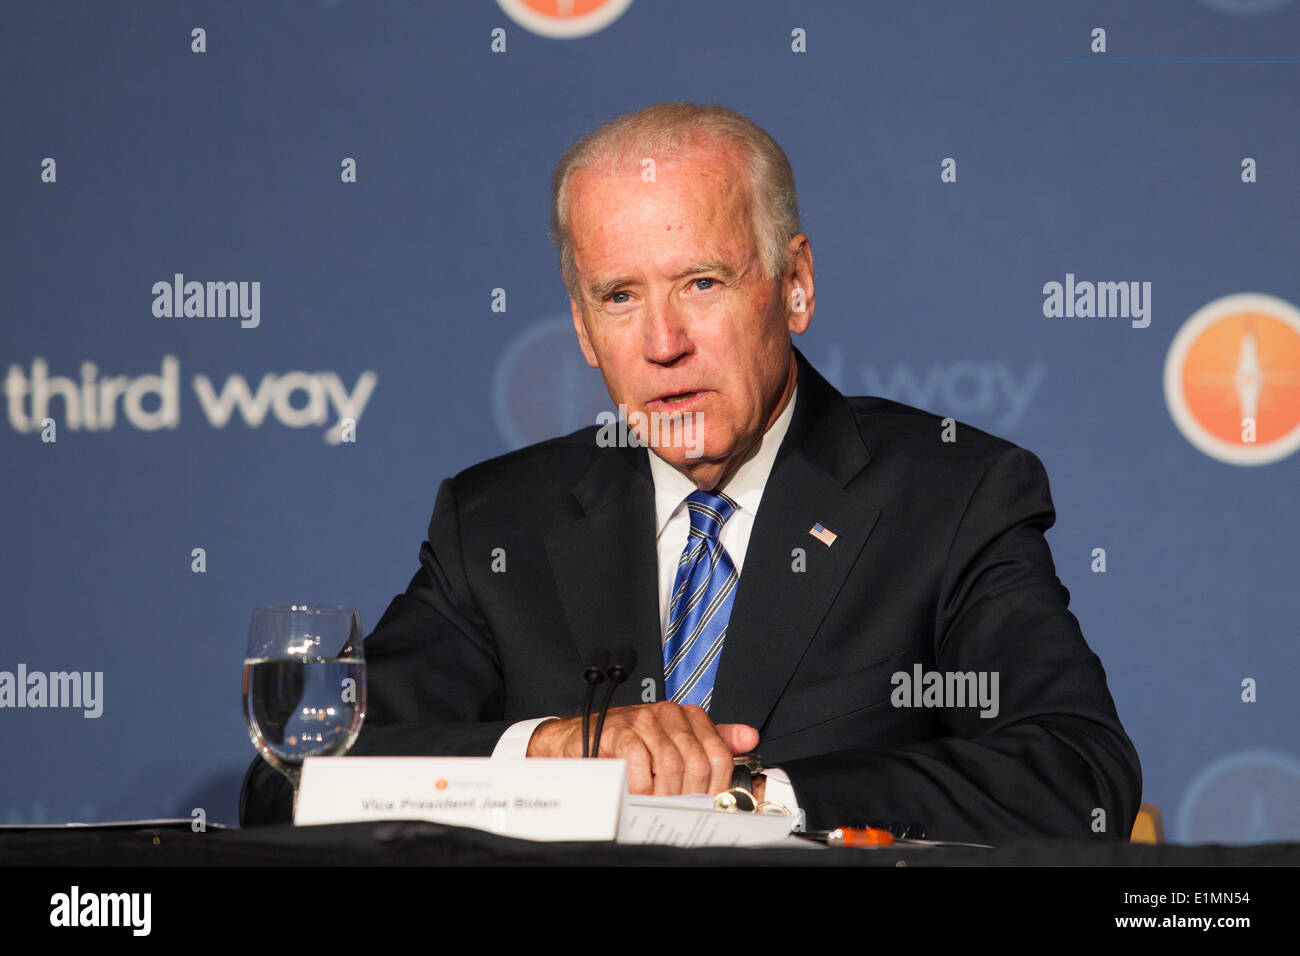 US Vice President Joe Biden makes a point during  roundtable discussion on the future of workforce development at the Third Way conference the Ronald Reagan Building June 4, 2014 in Washington, DC. Stock Photo